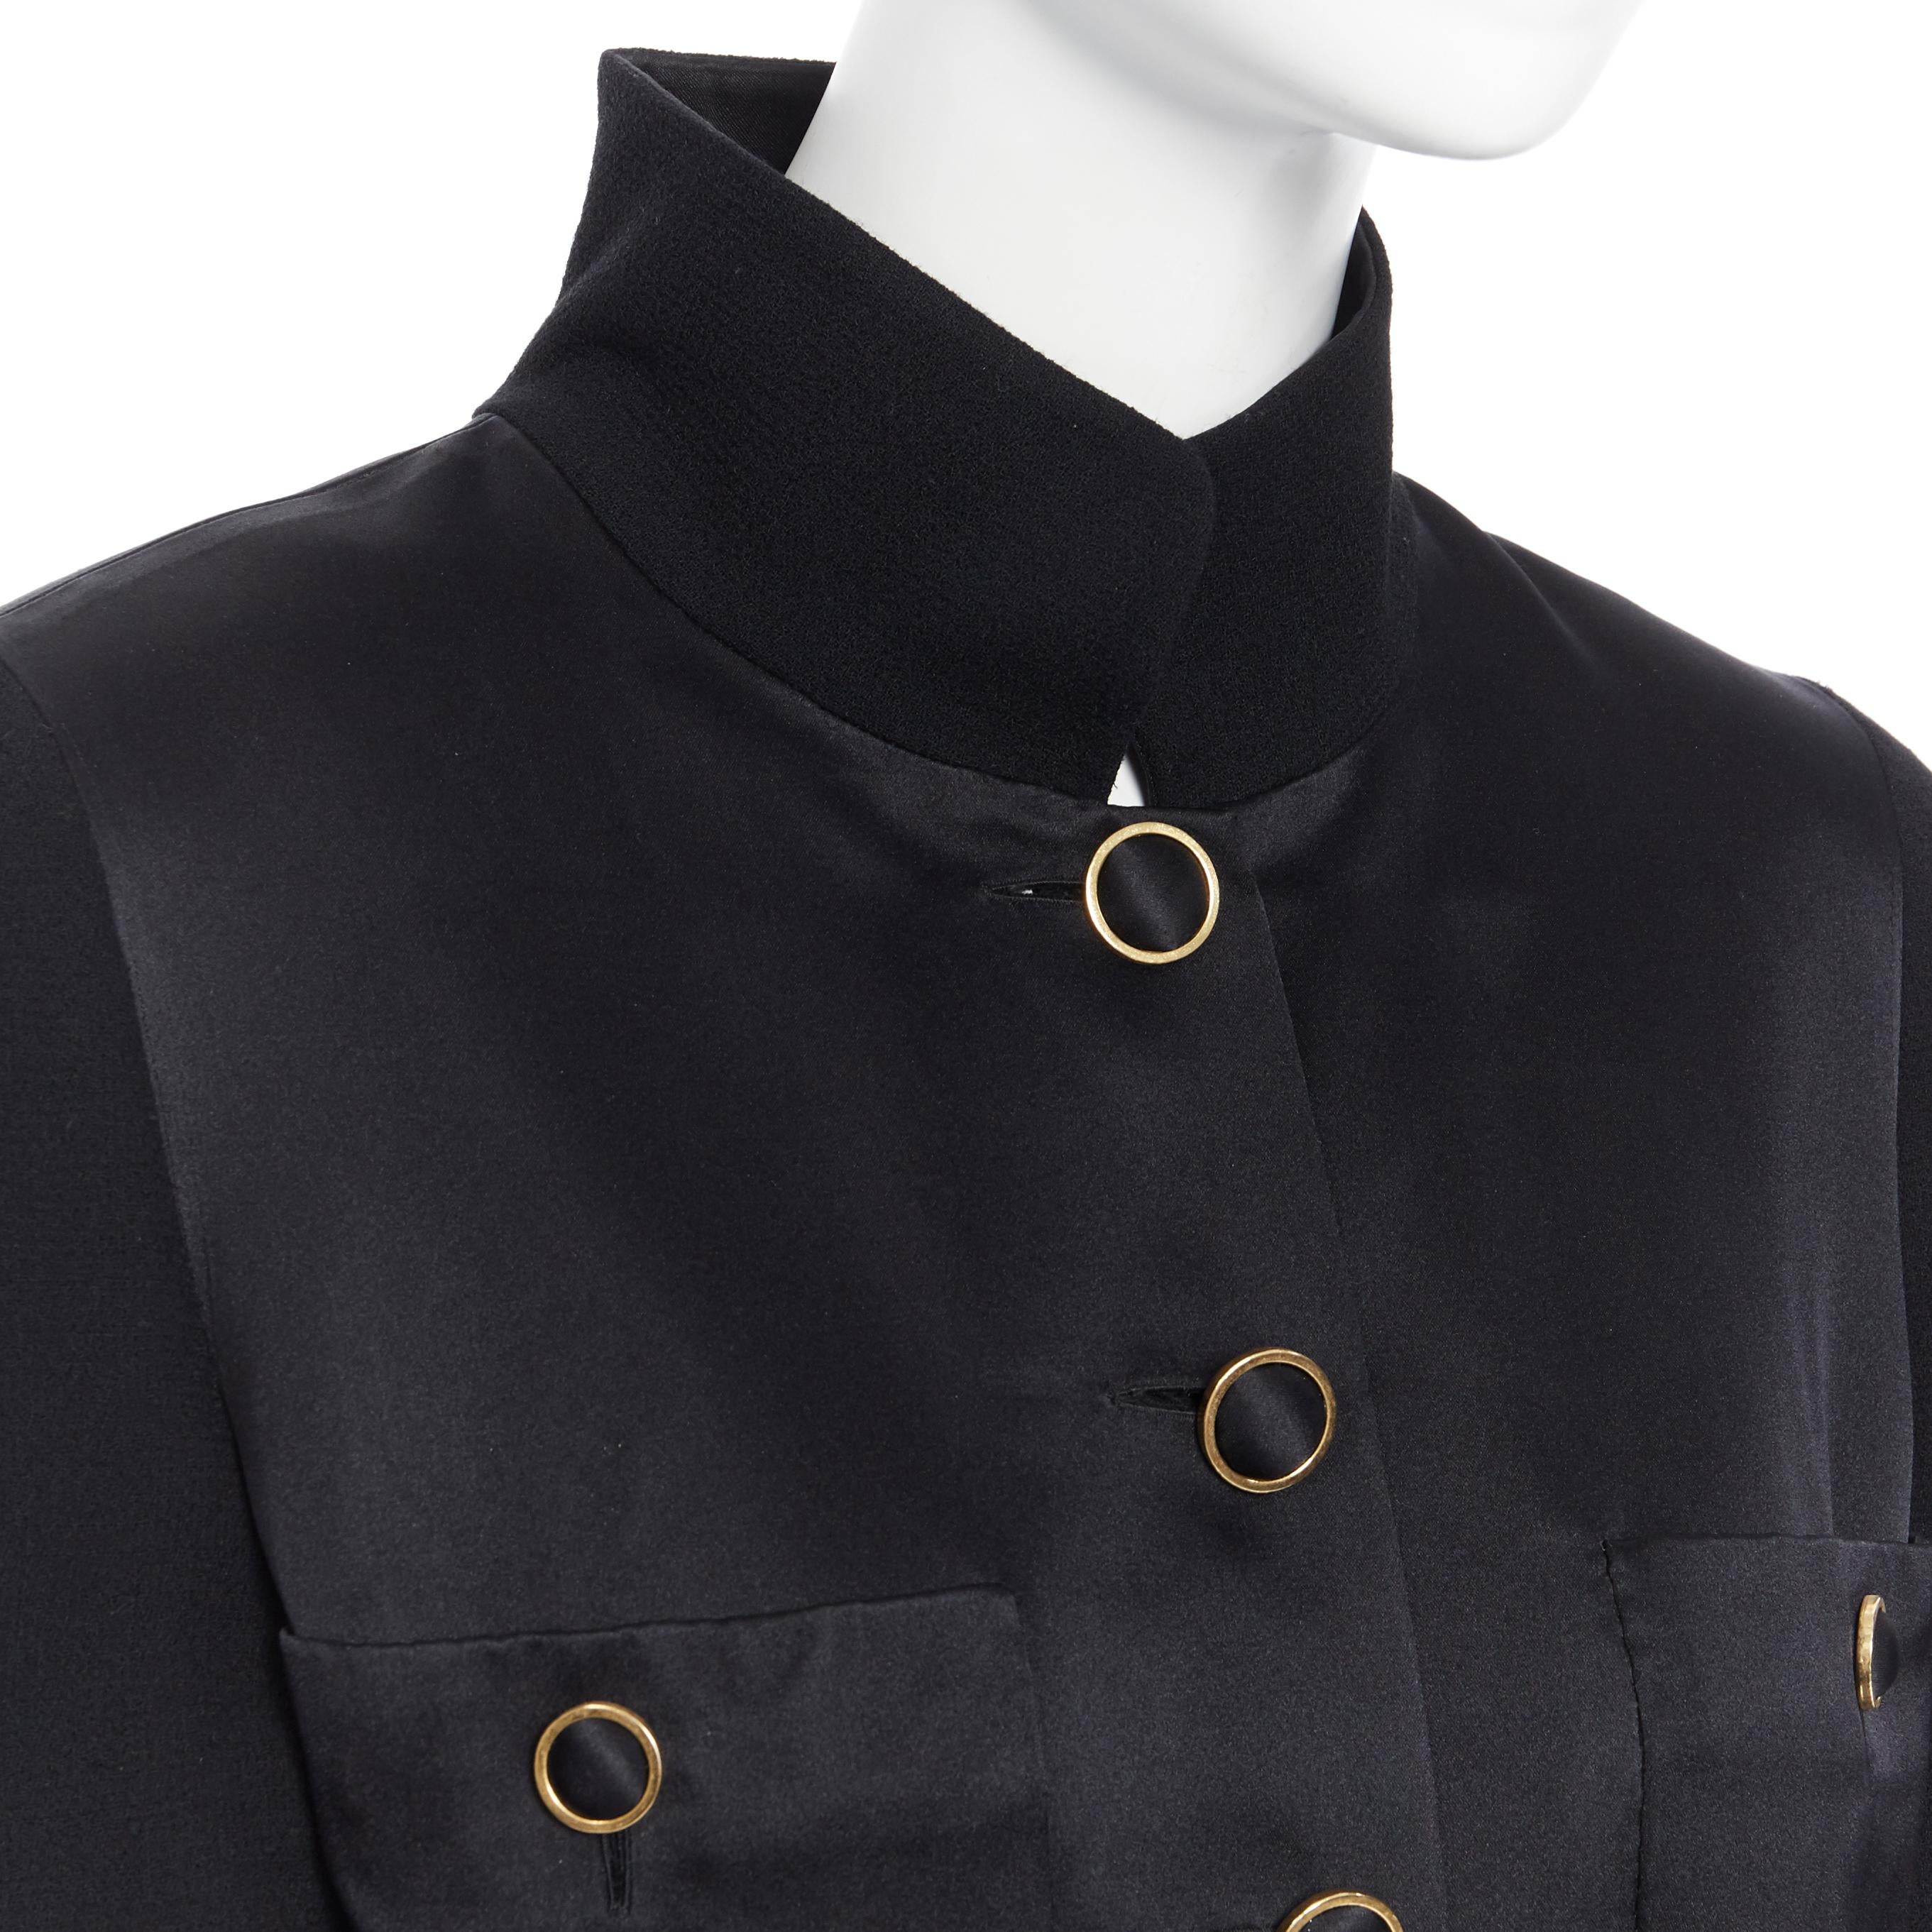 CHANEL black silk satin crepe 4 pockets gold high collar mandarin jacket FR42
Brand: Chanel
Designer: Karl Lagerfeld
Color: Black
Pattern: Solid
Closure: Button
Extra Detail: Classic mandarin jacket. 4 front patch pockets. Constructed with a silk